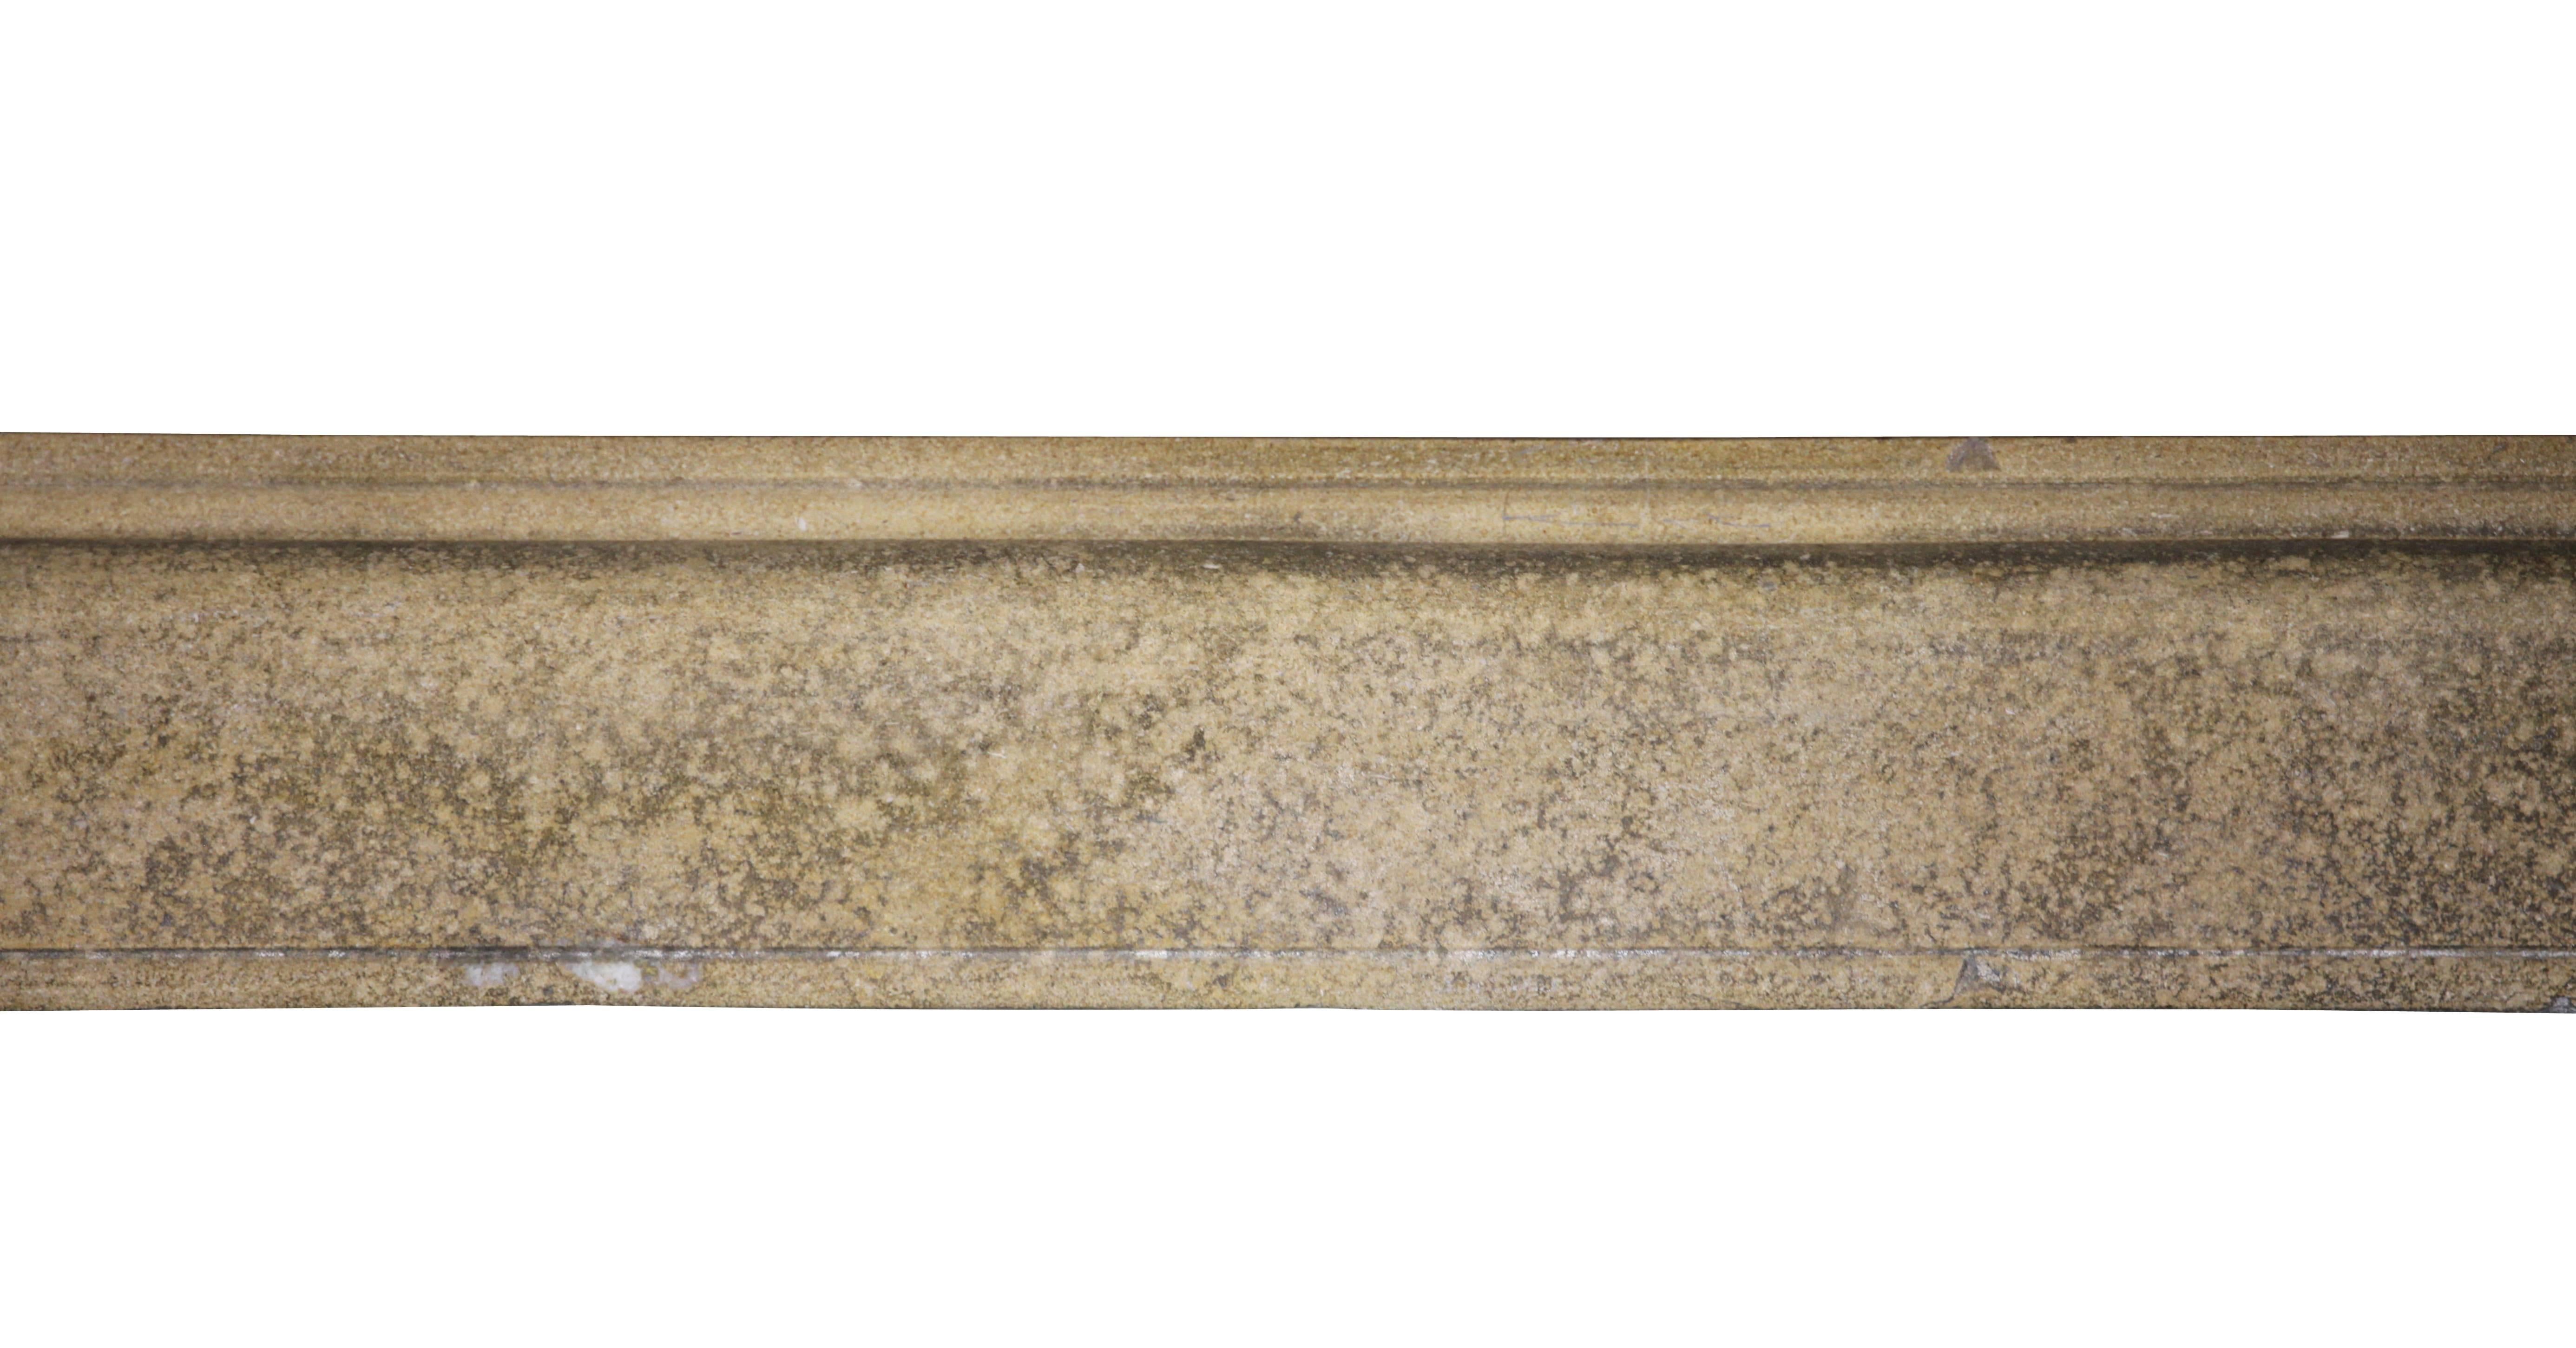 Original hard limestone fireplace surround with beautifully carved jambs and a nice patina also an assemblage called. It is a fine decorative element for a cosy country or rustic interior concept with a small firebox.
Measures :
115 cm EW